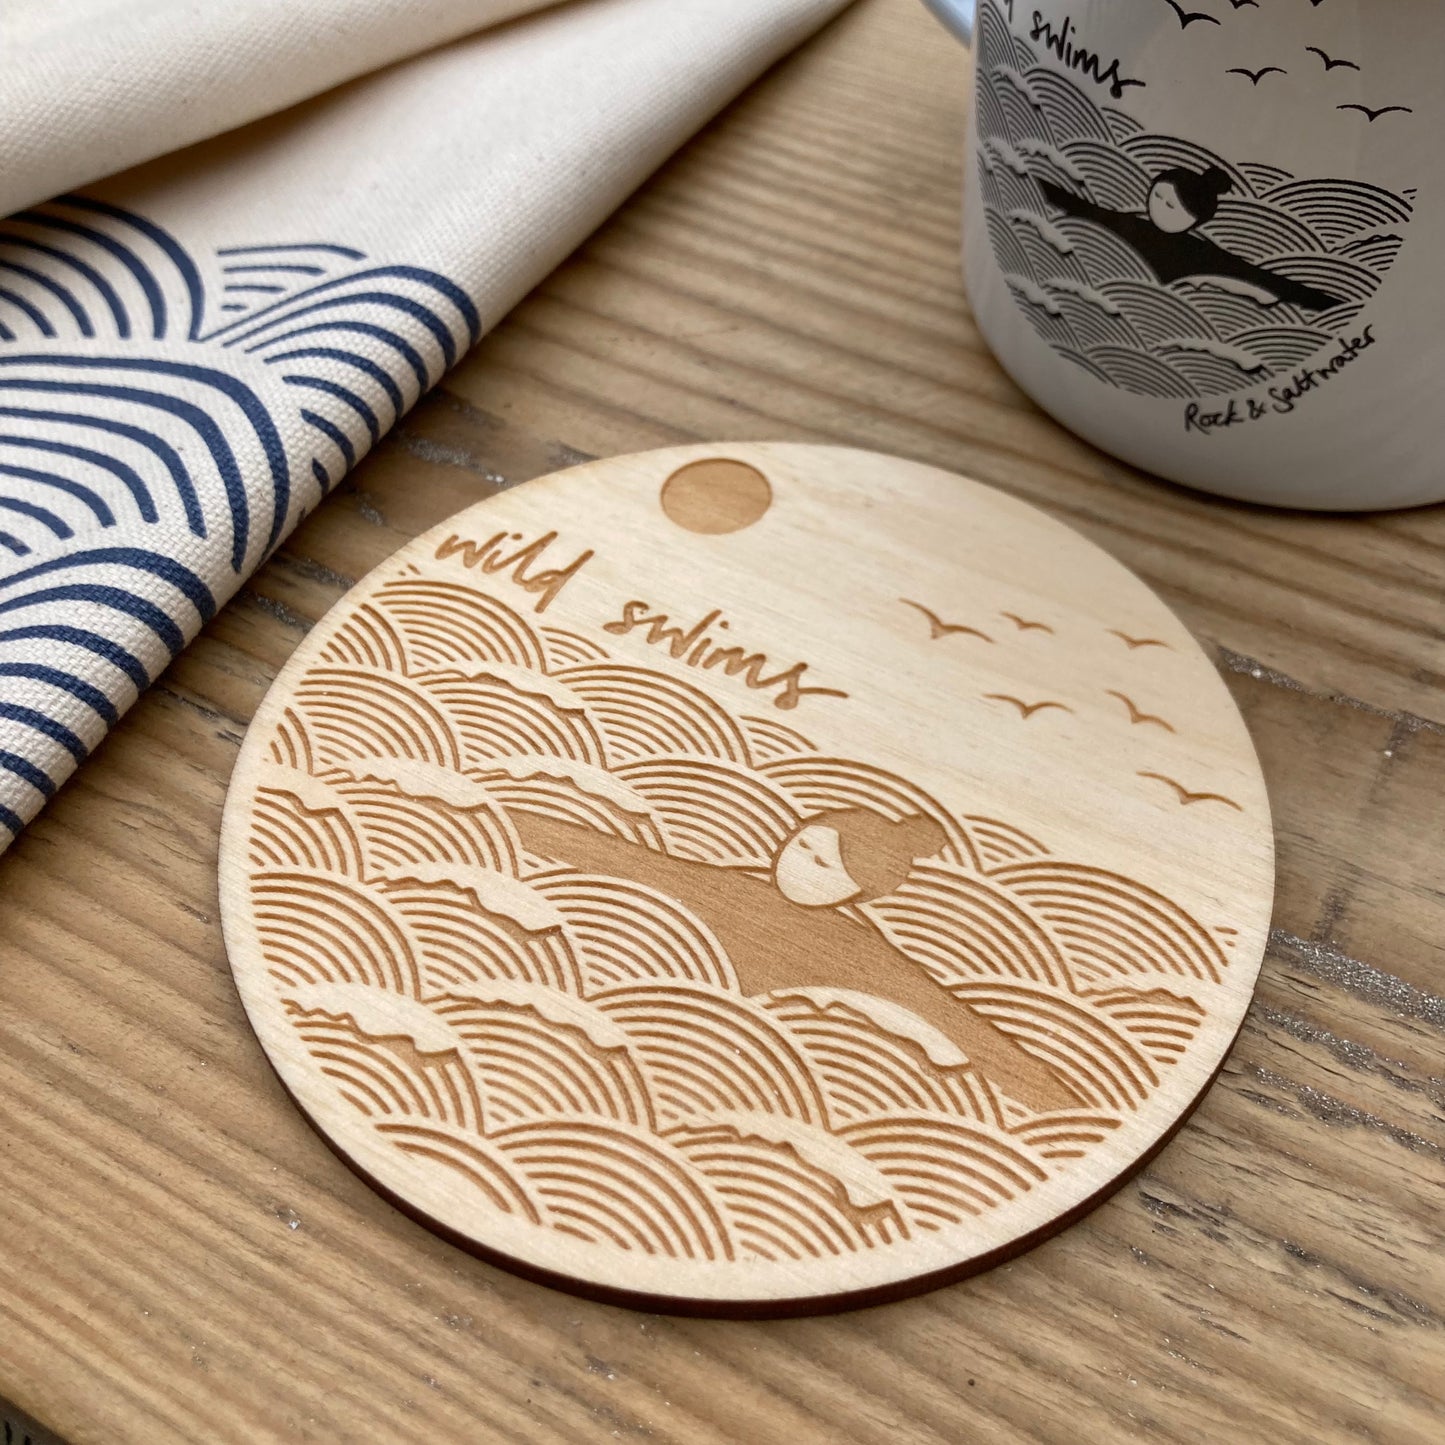 Wild swims laser etched coaster